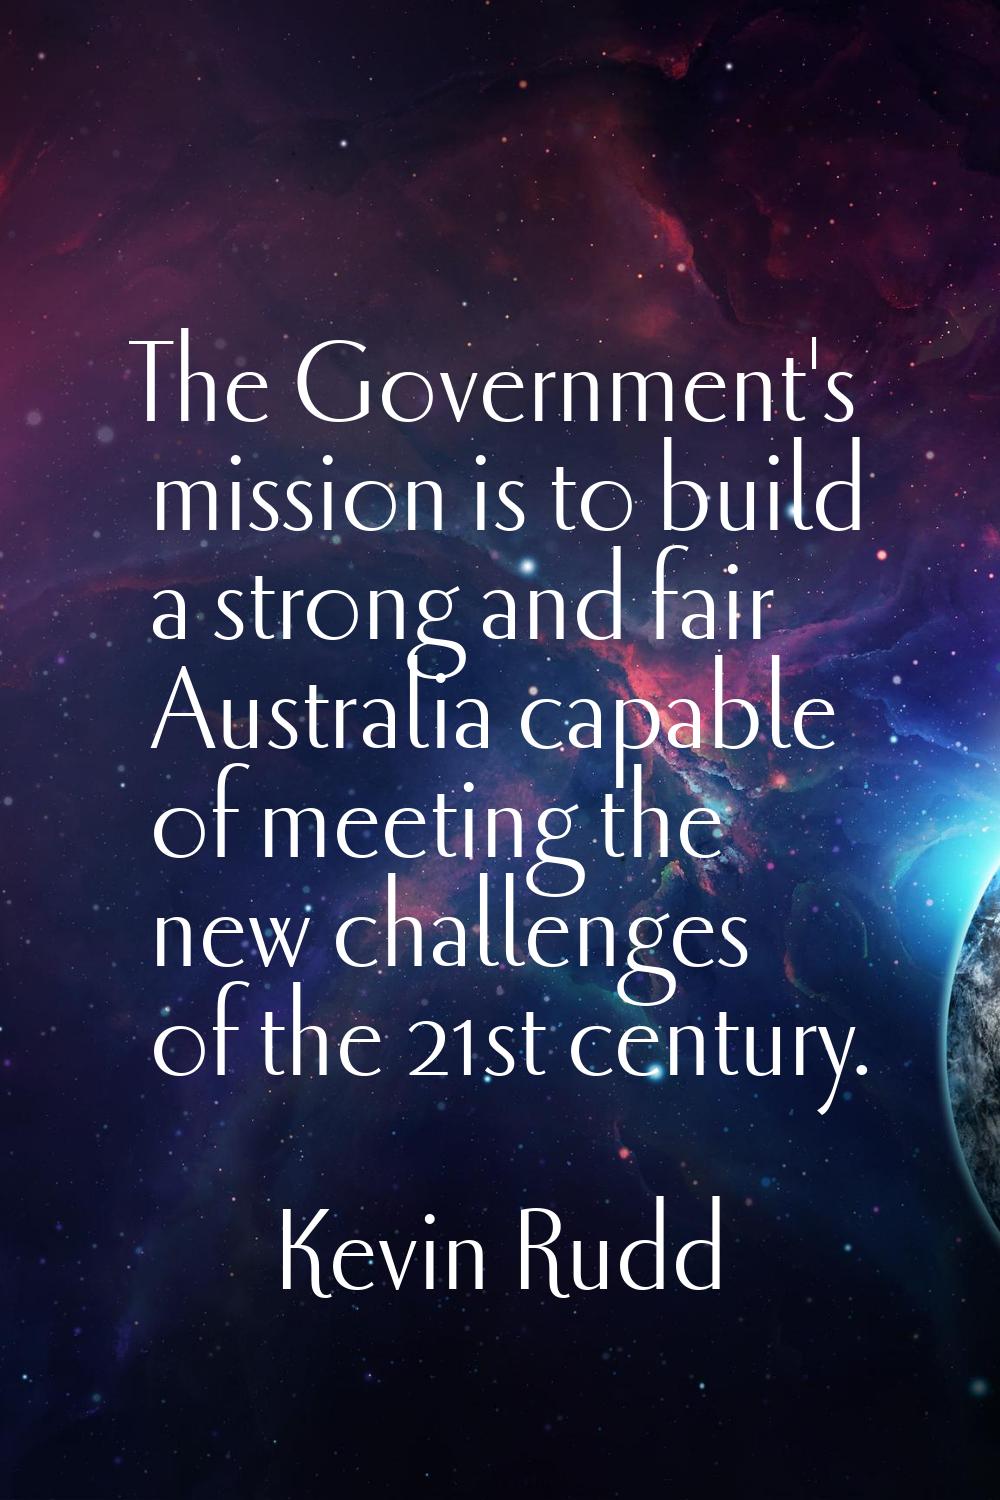 The Government's mission is to build a strong and fair Australia capable of meeting the new challen